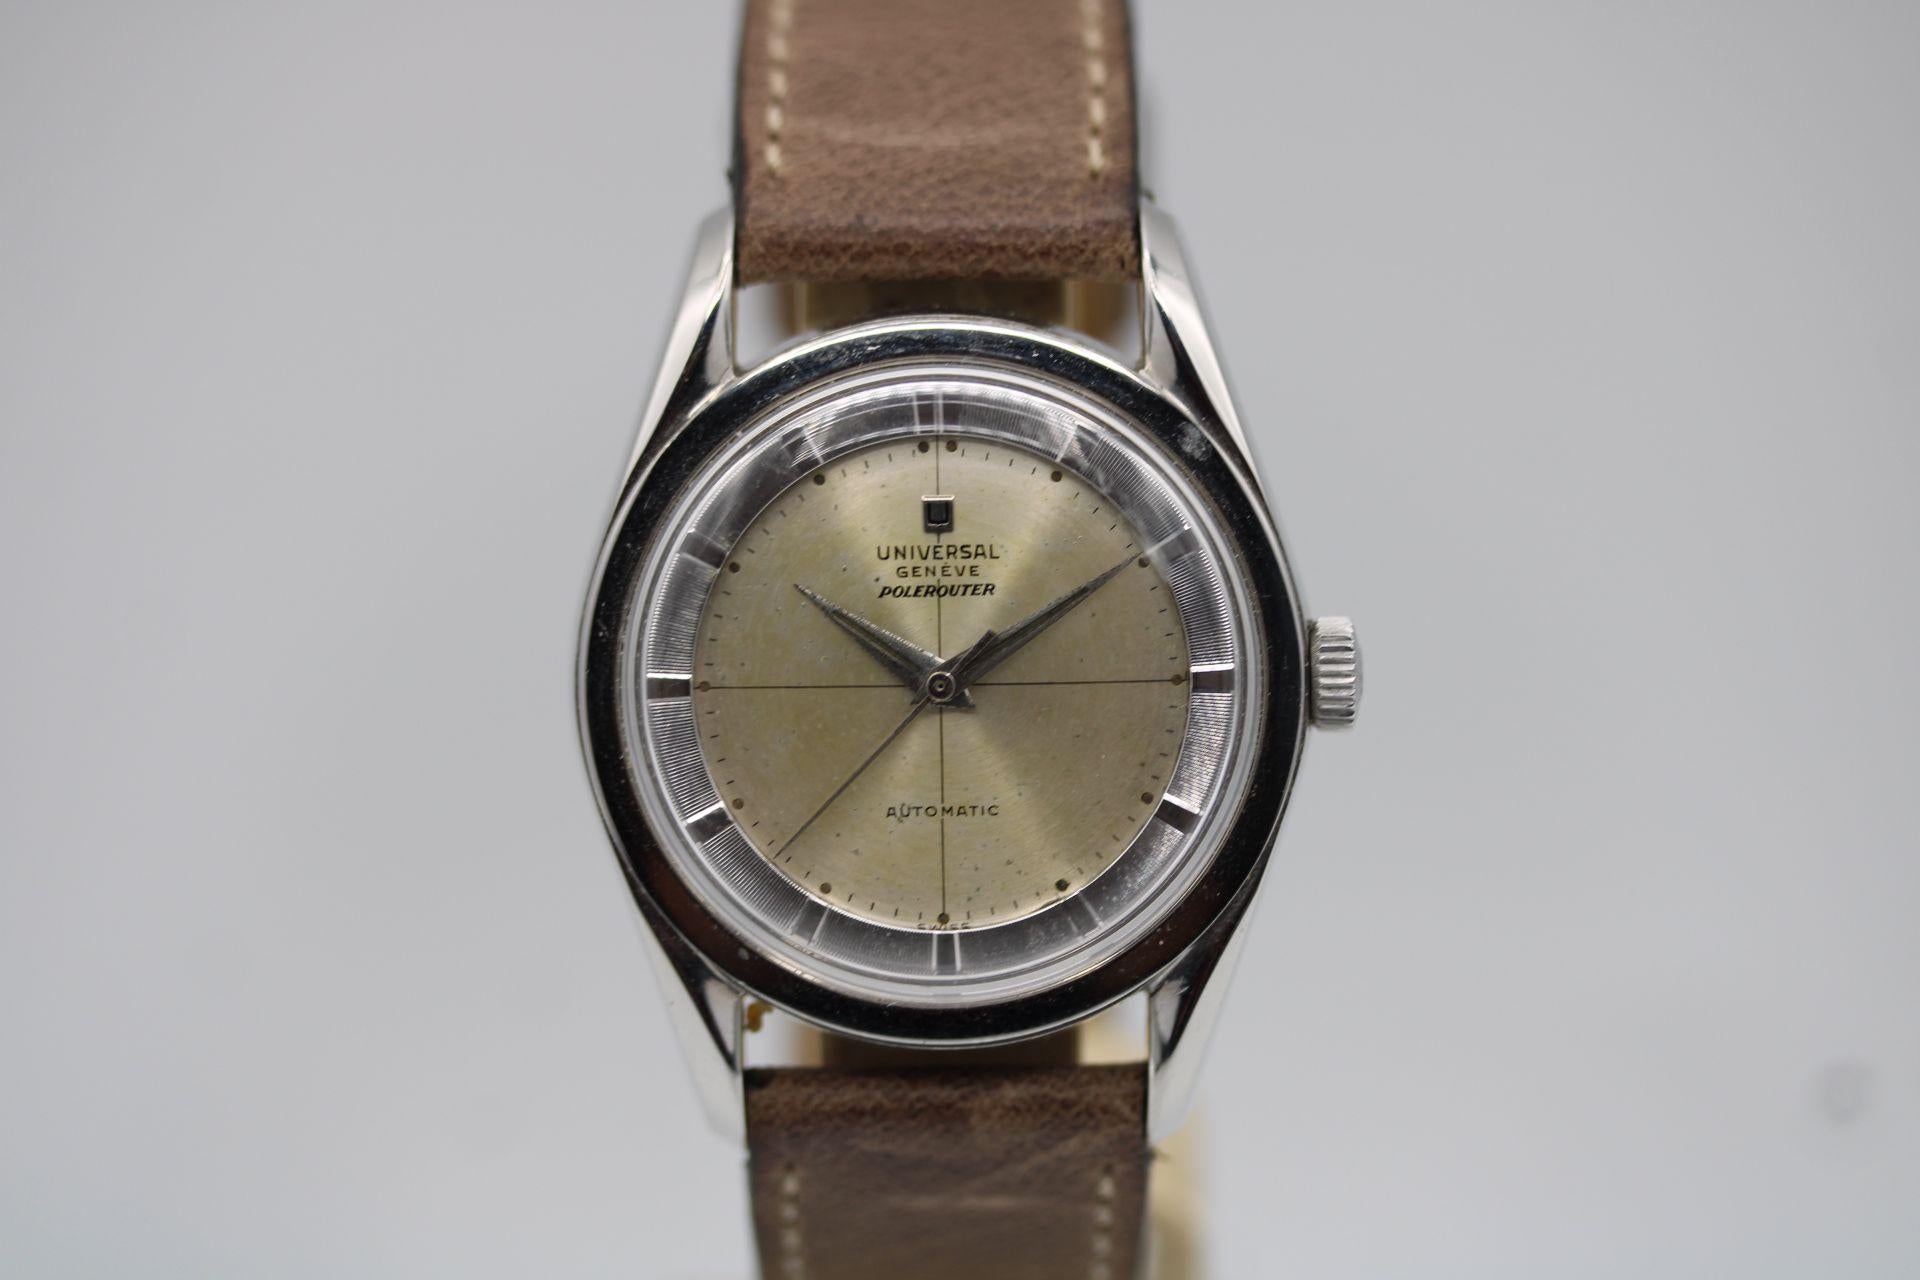 A truly fine example of the iconic Universal Genève Polerouter, this model is the 20217-5 version automatic bumper dating back to around 1955 by the serial number. Its been very well looked after and appears to be all original.  

36mm stainless